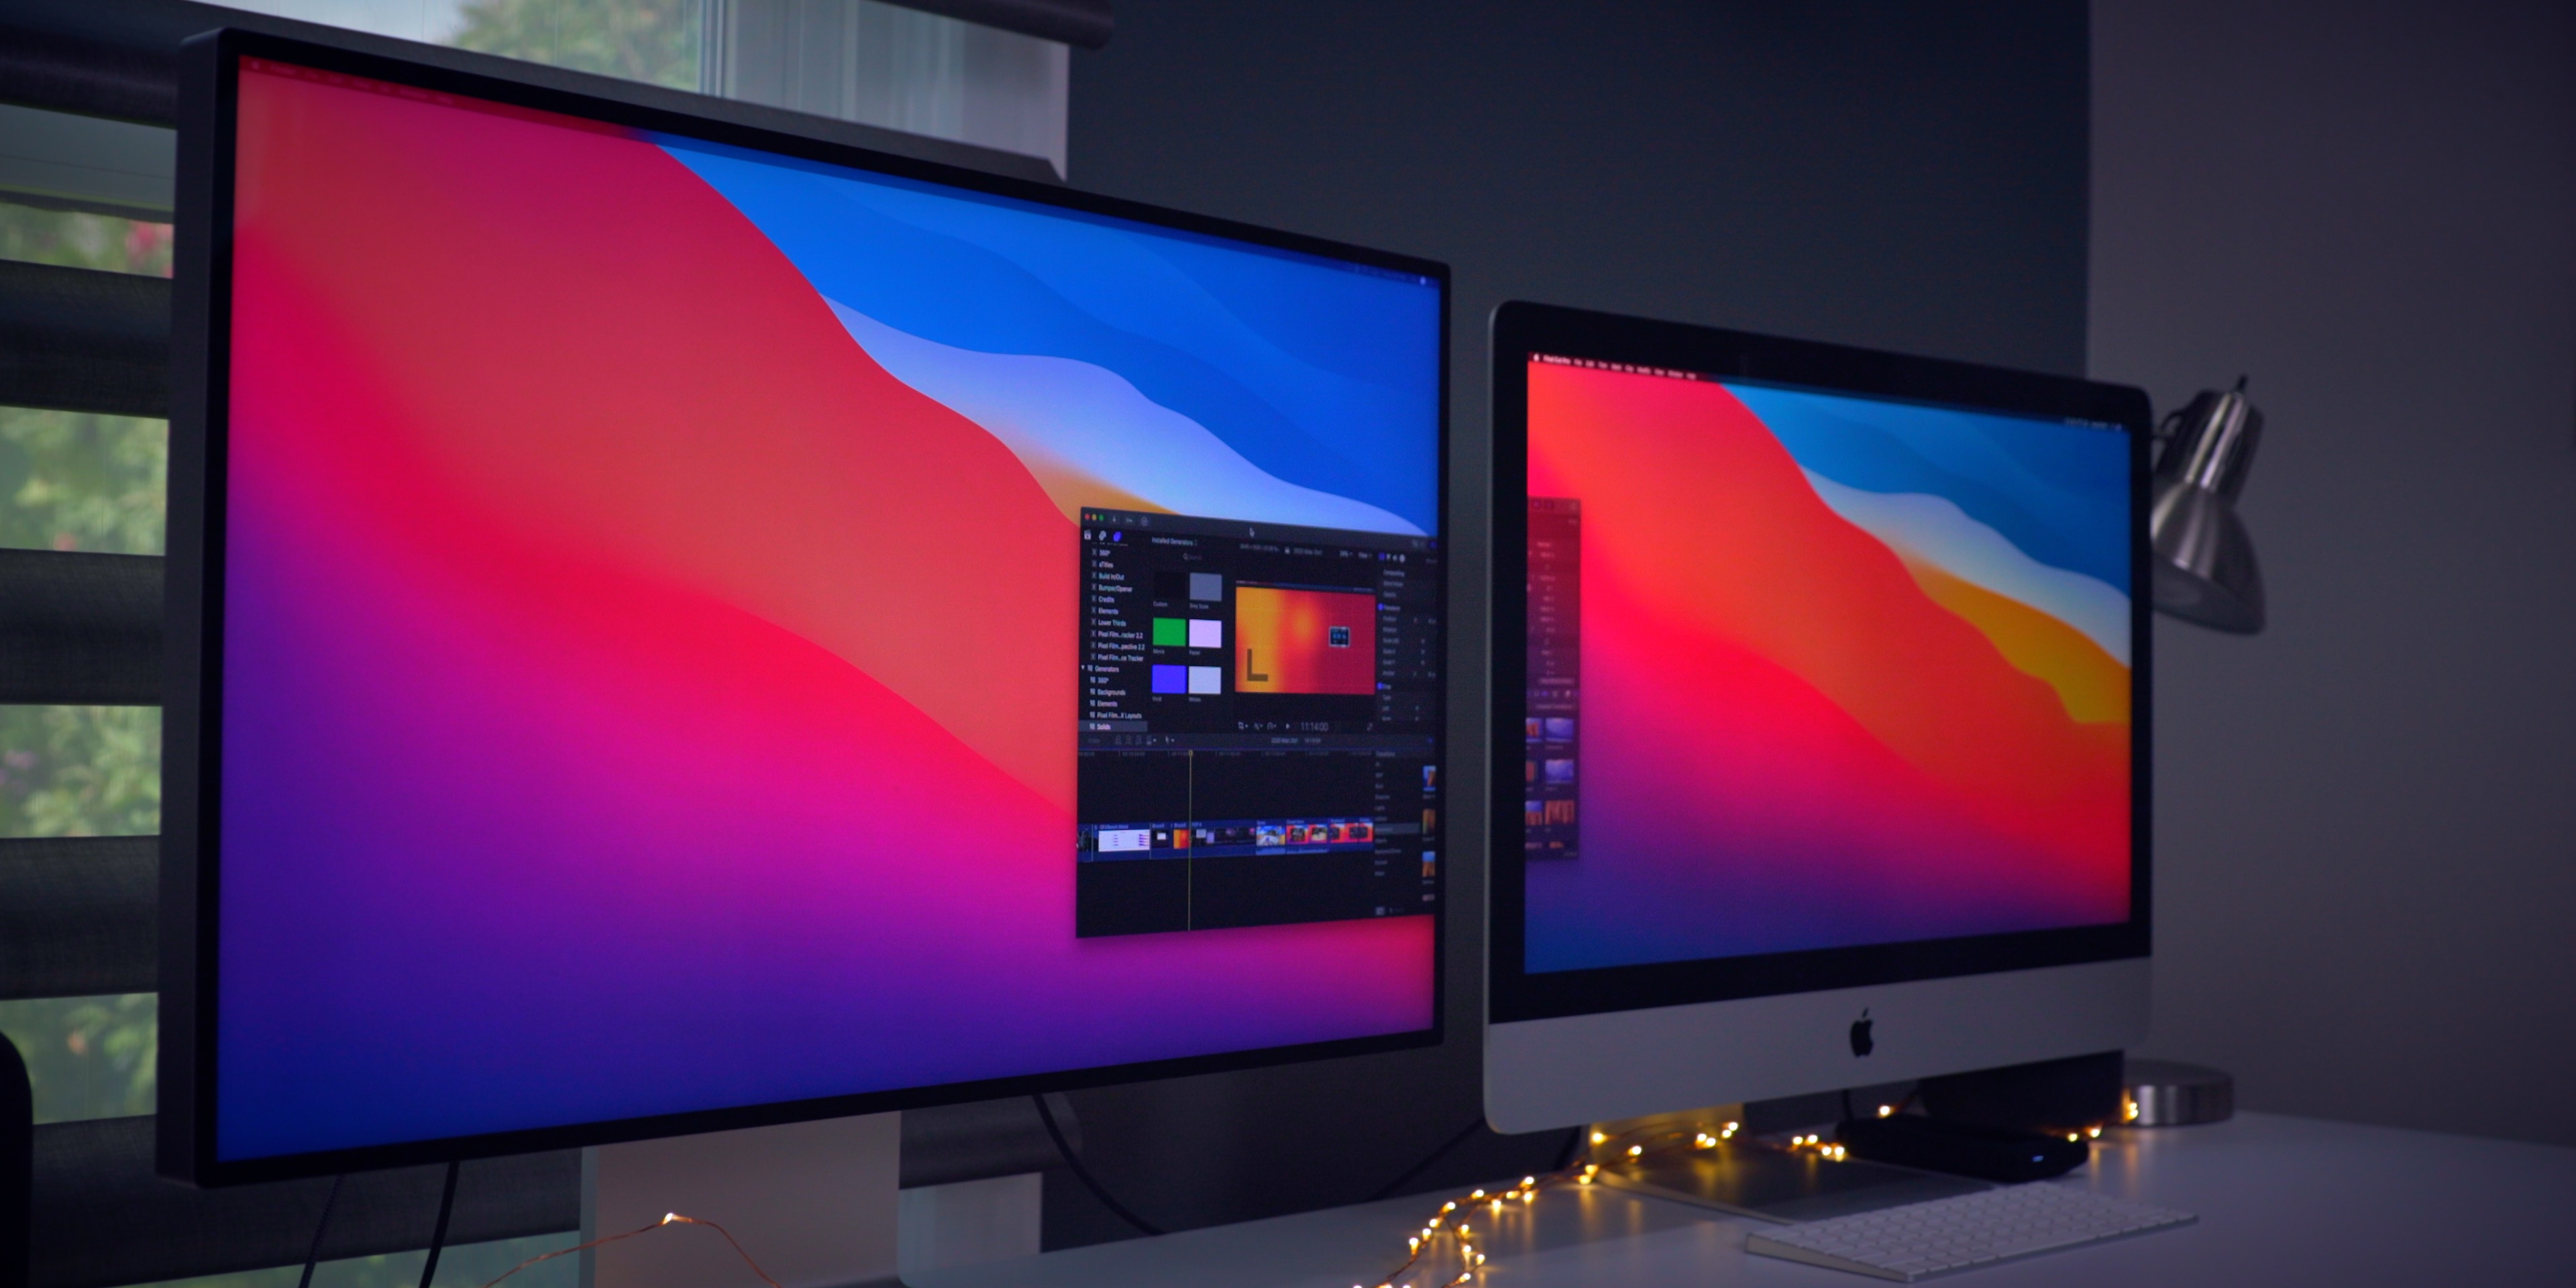 https://9to5mac.com/wp-content/uploads/sites/6/2020/08/2020-5K-iMac-Review-with-Pro-Display-XDR.jpg?quality=82&strip=all